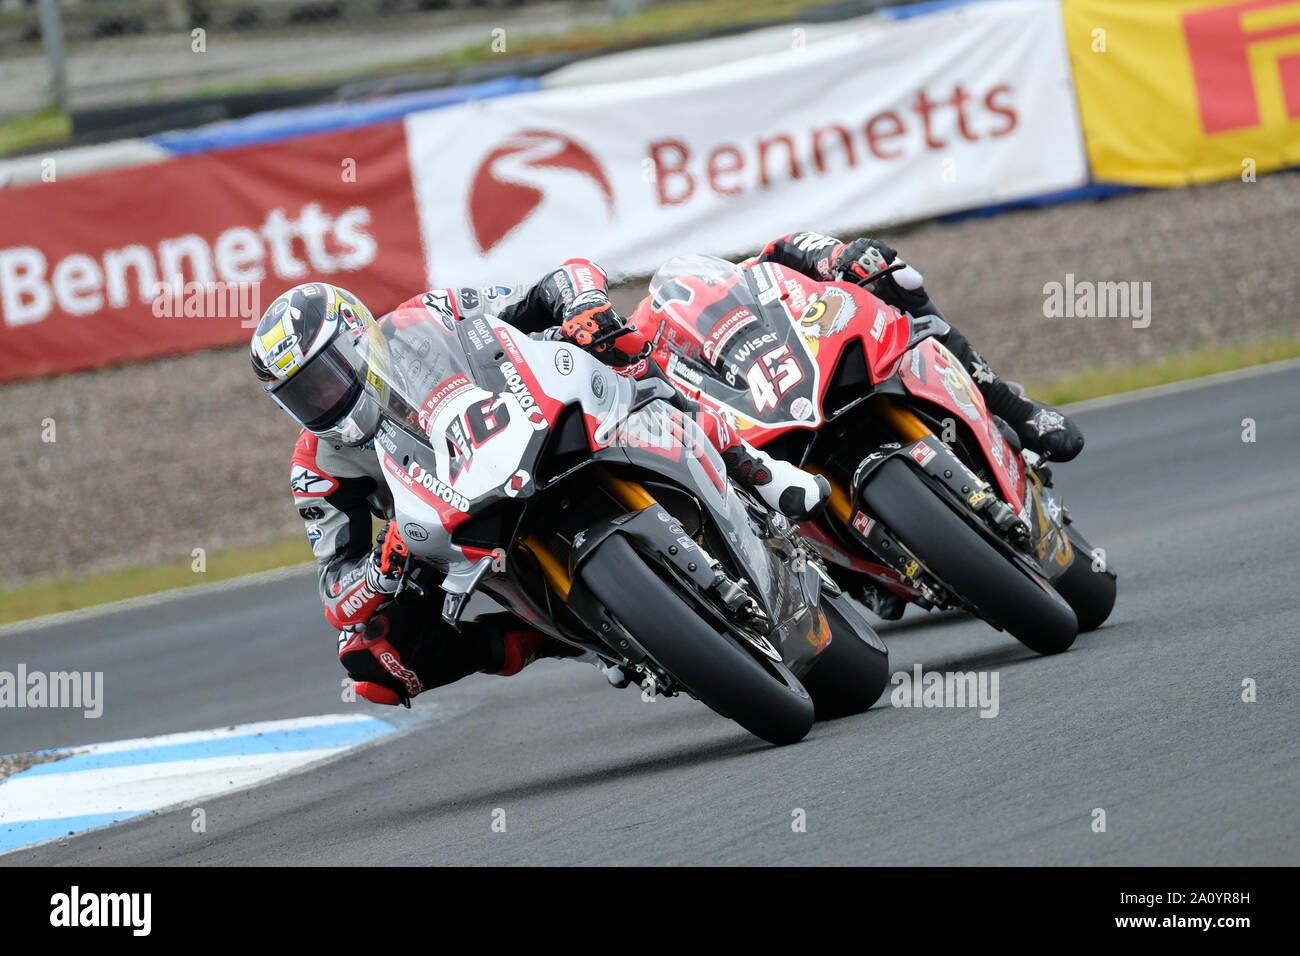 Tommy Bridewell on the Oxford Racing Moto Rapido Ducati and Scott Redding on the Bewiser Ducati at Knockhill Racing Circuit Stock Photo